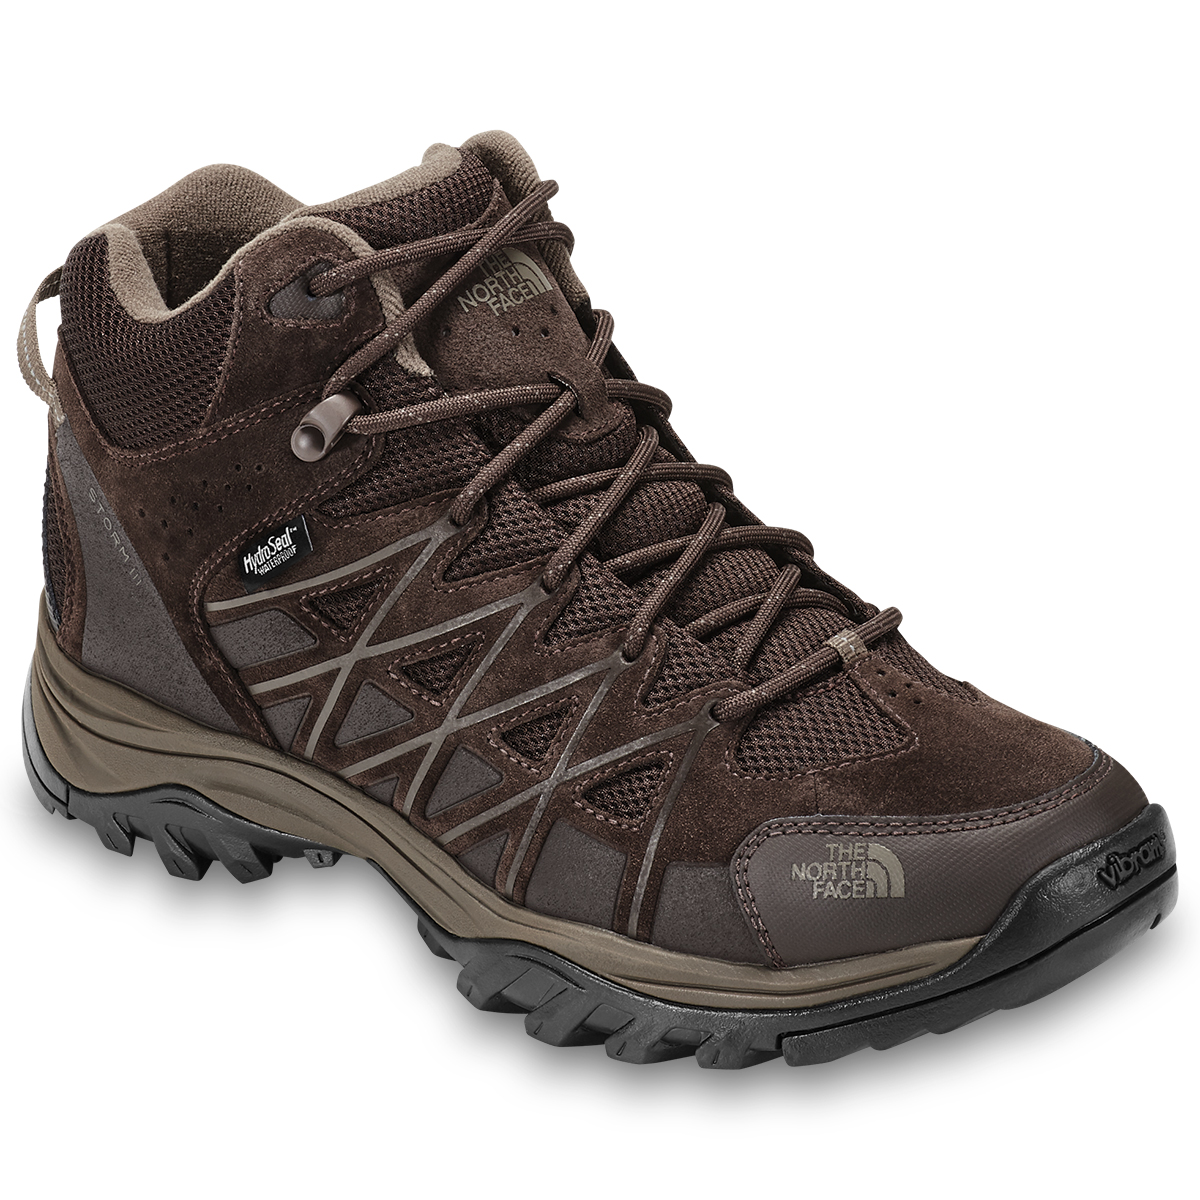 The North Face Men's Storm 3 Waterproof Hiking Boots - Brown, 10.5